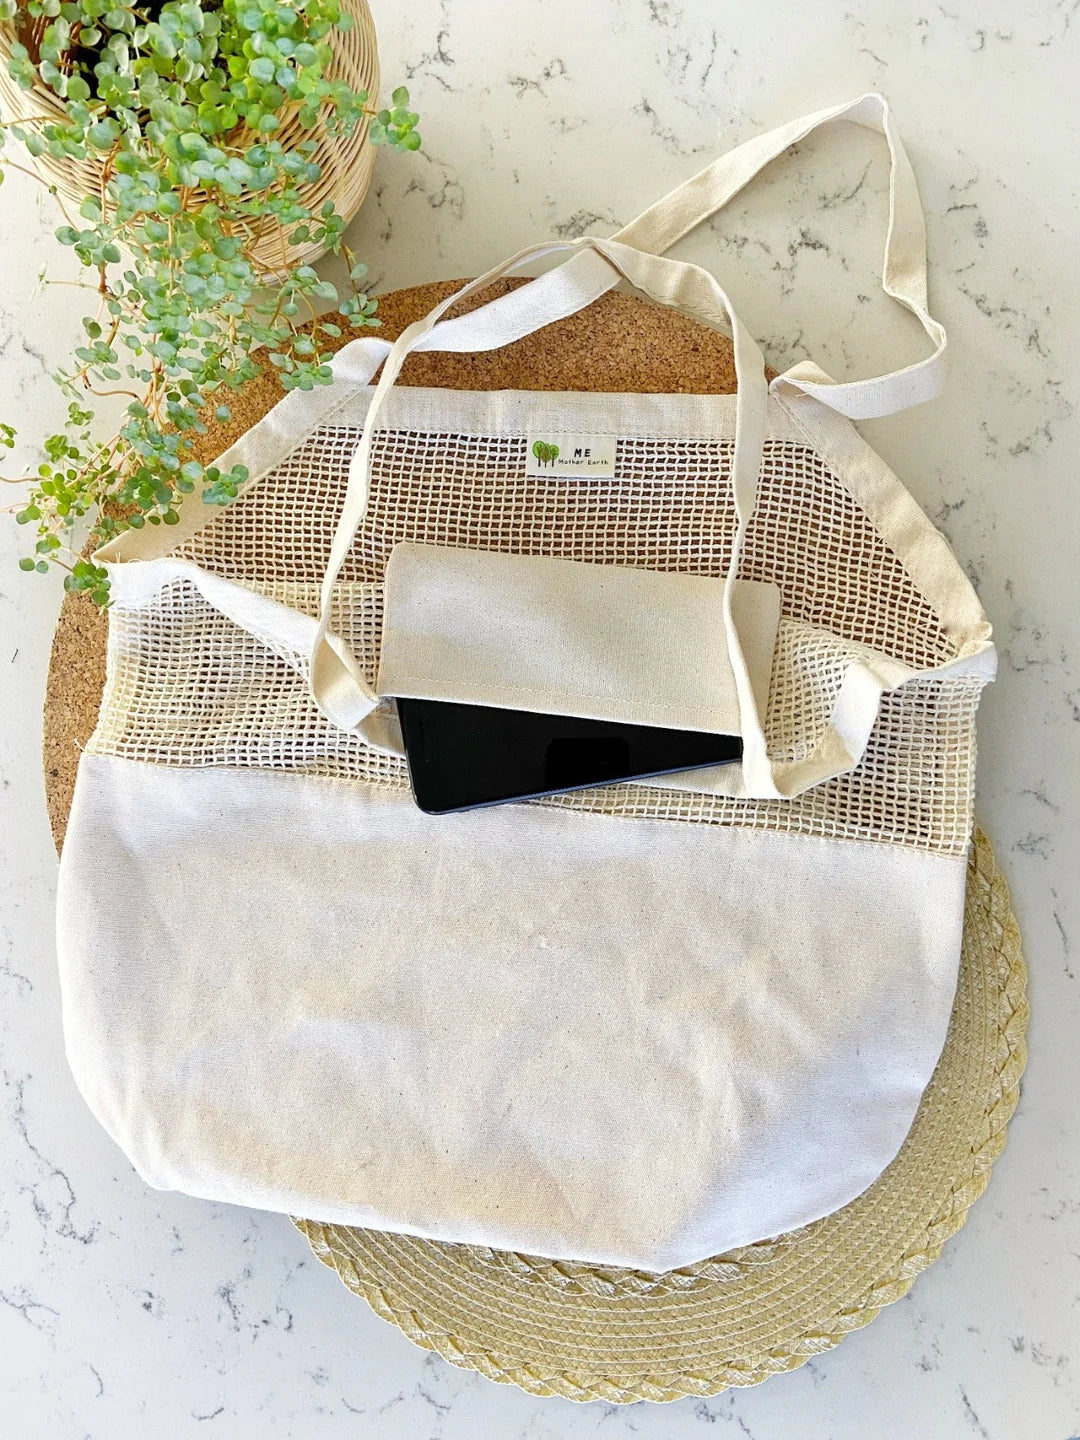 ME Mother Earth Organic Half Mesh Market Tote with Phone Pocket